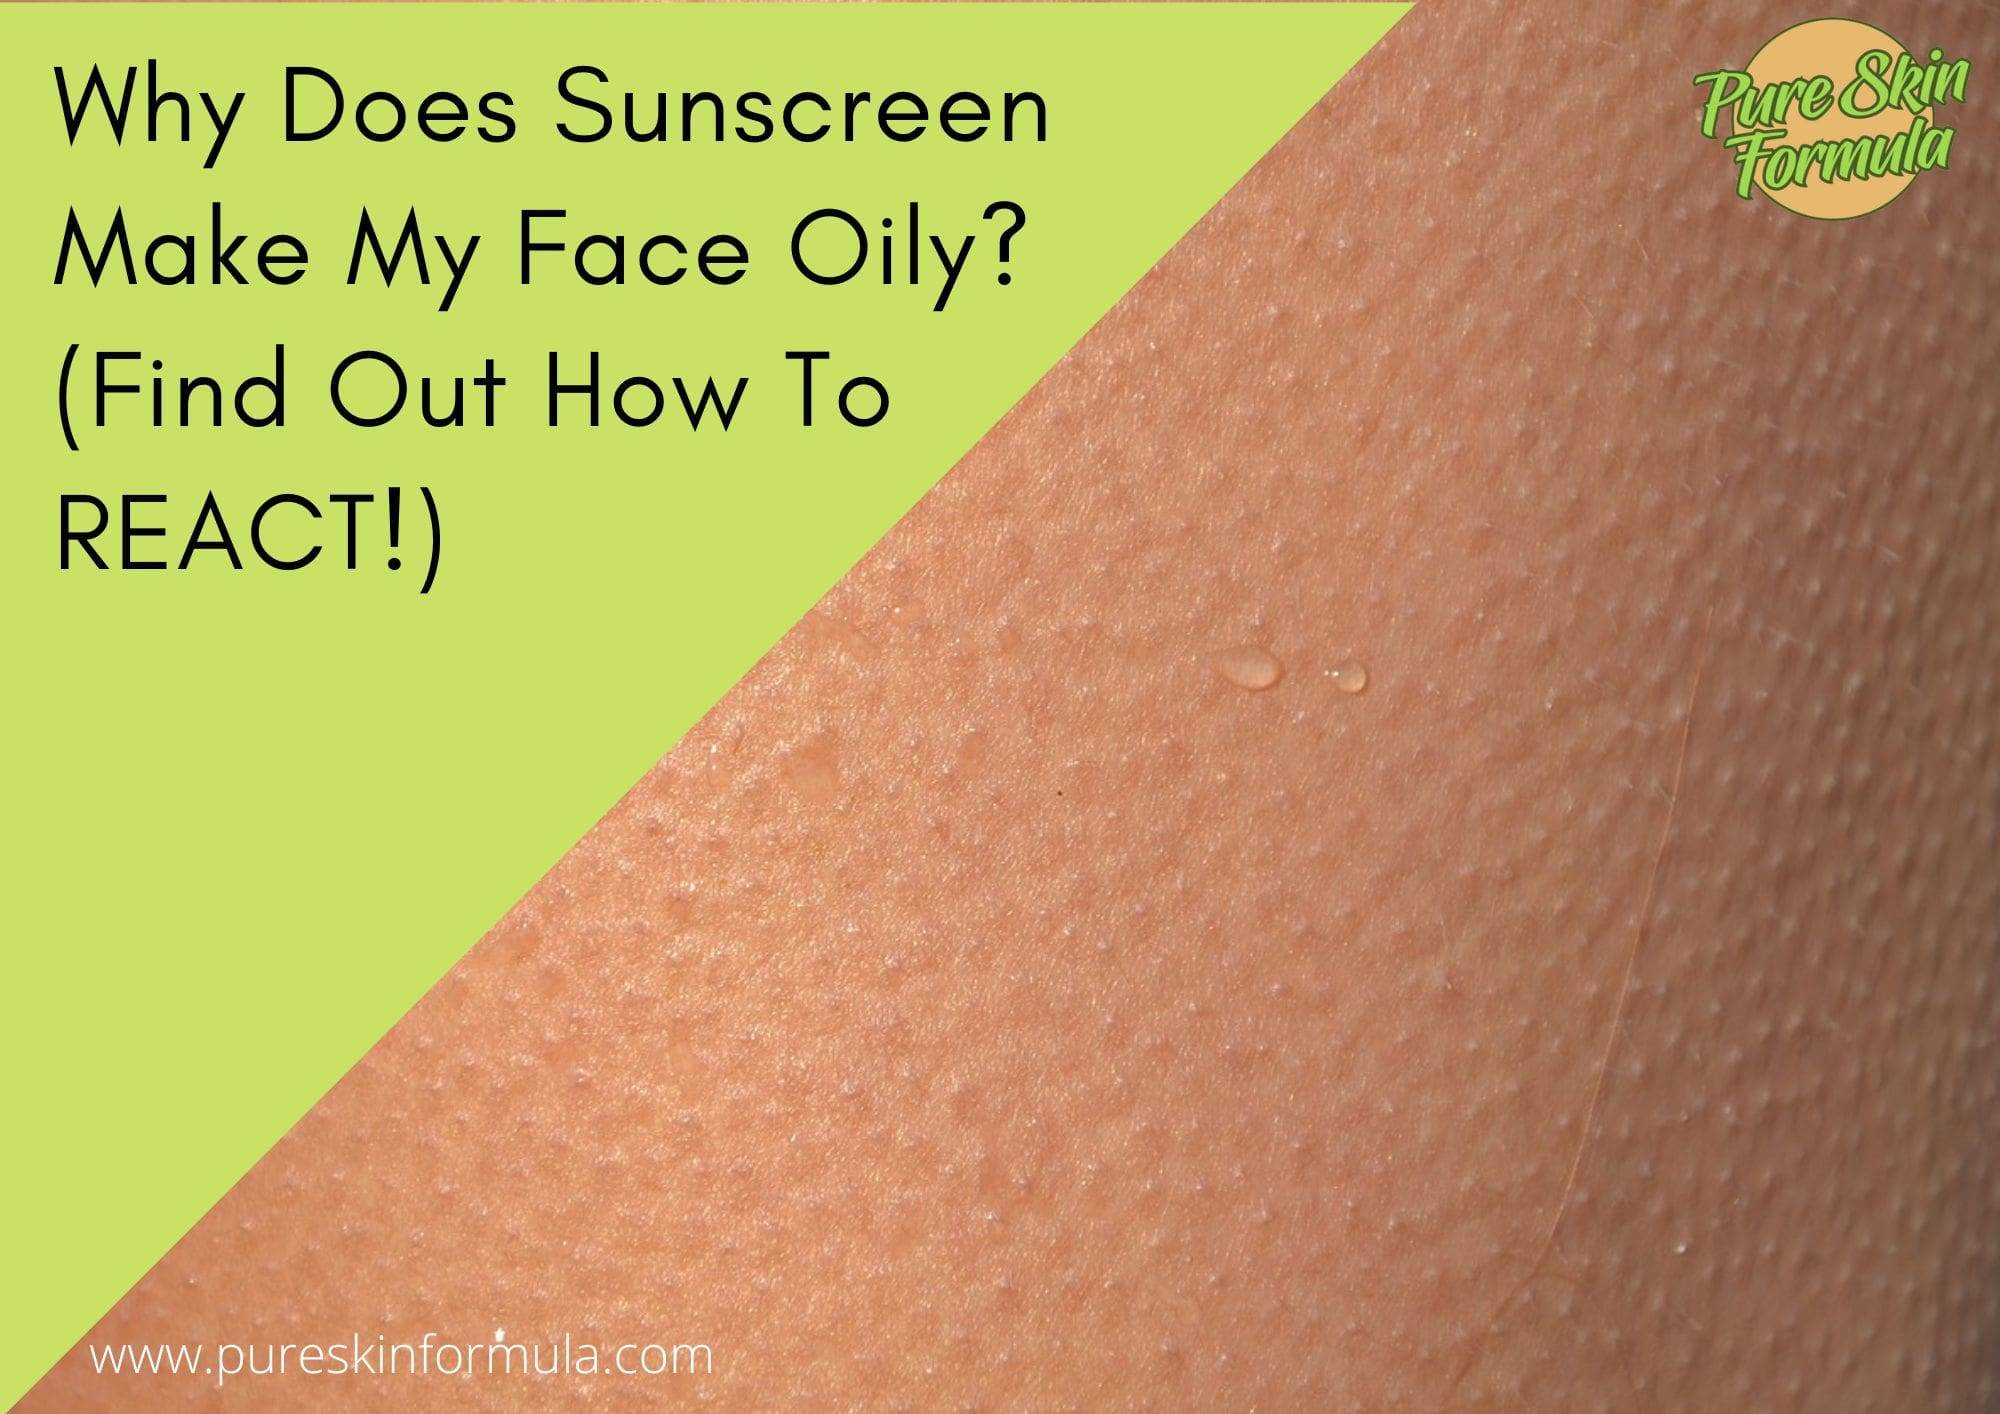 Why Does Sunscreen Make My Face Oily_featured image